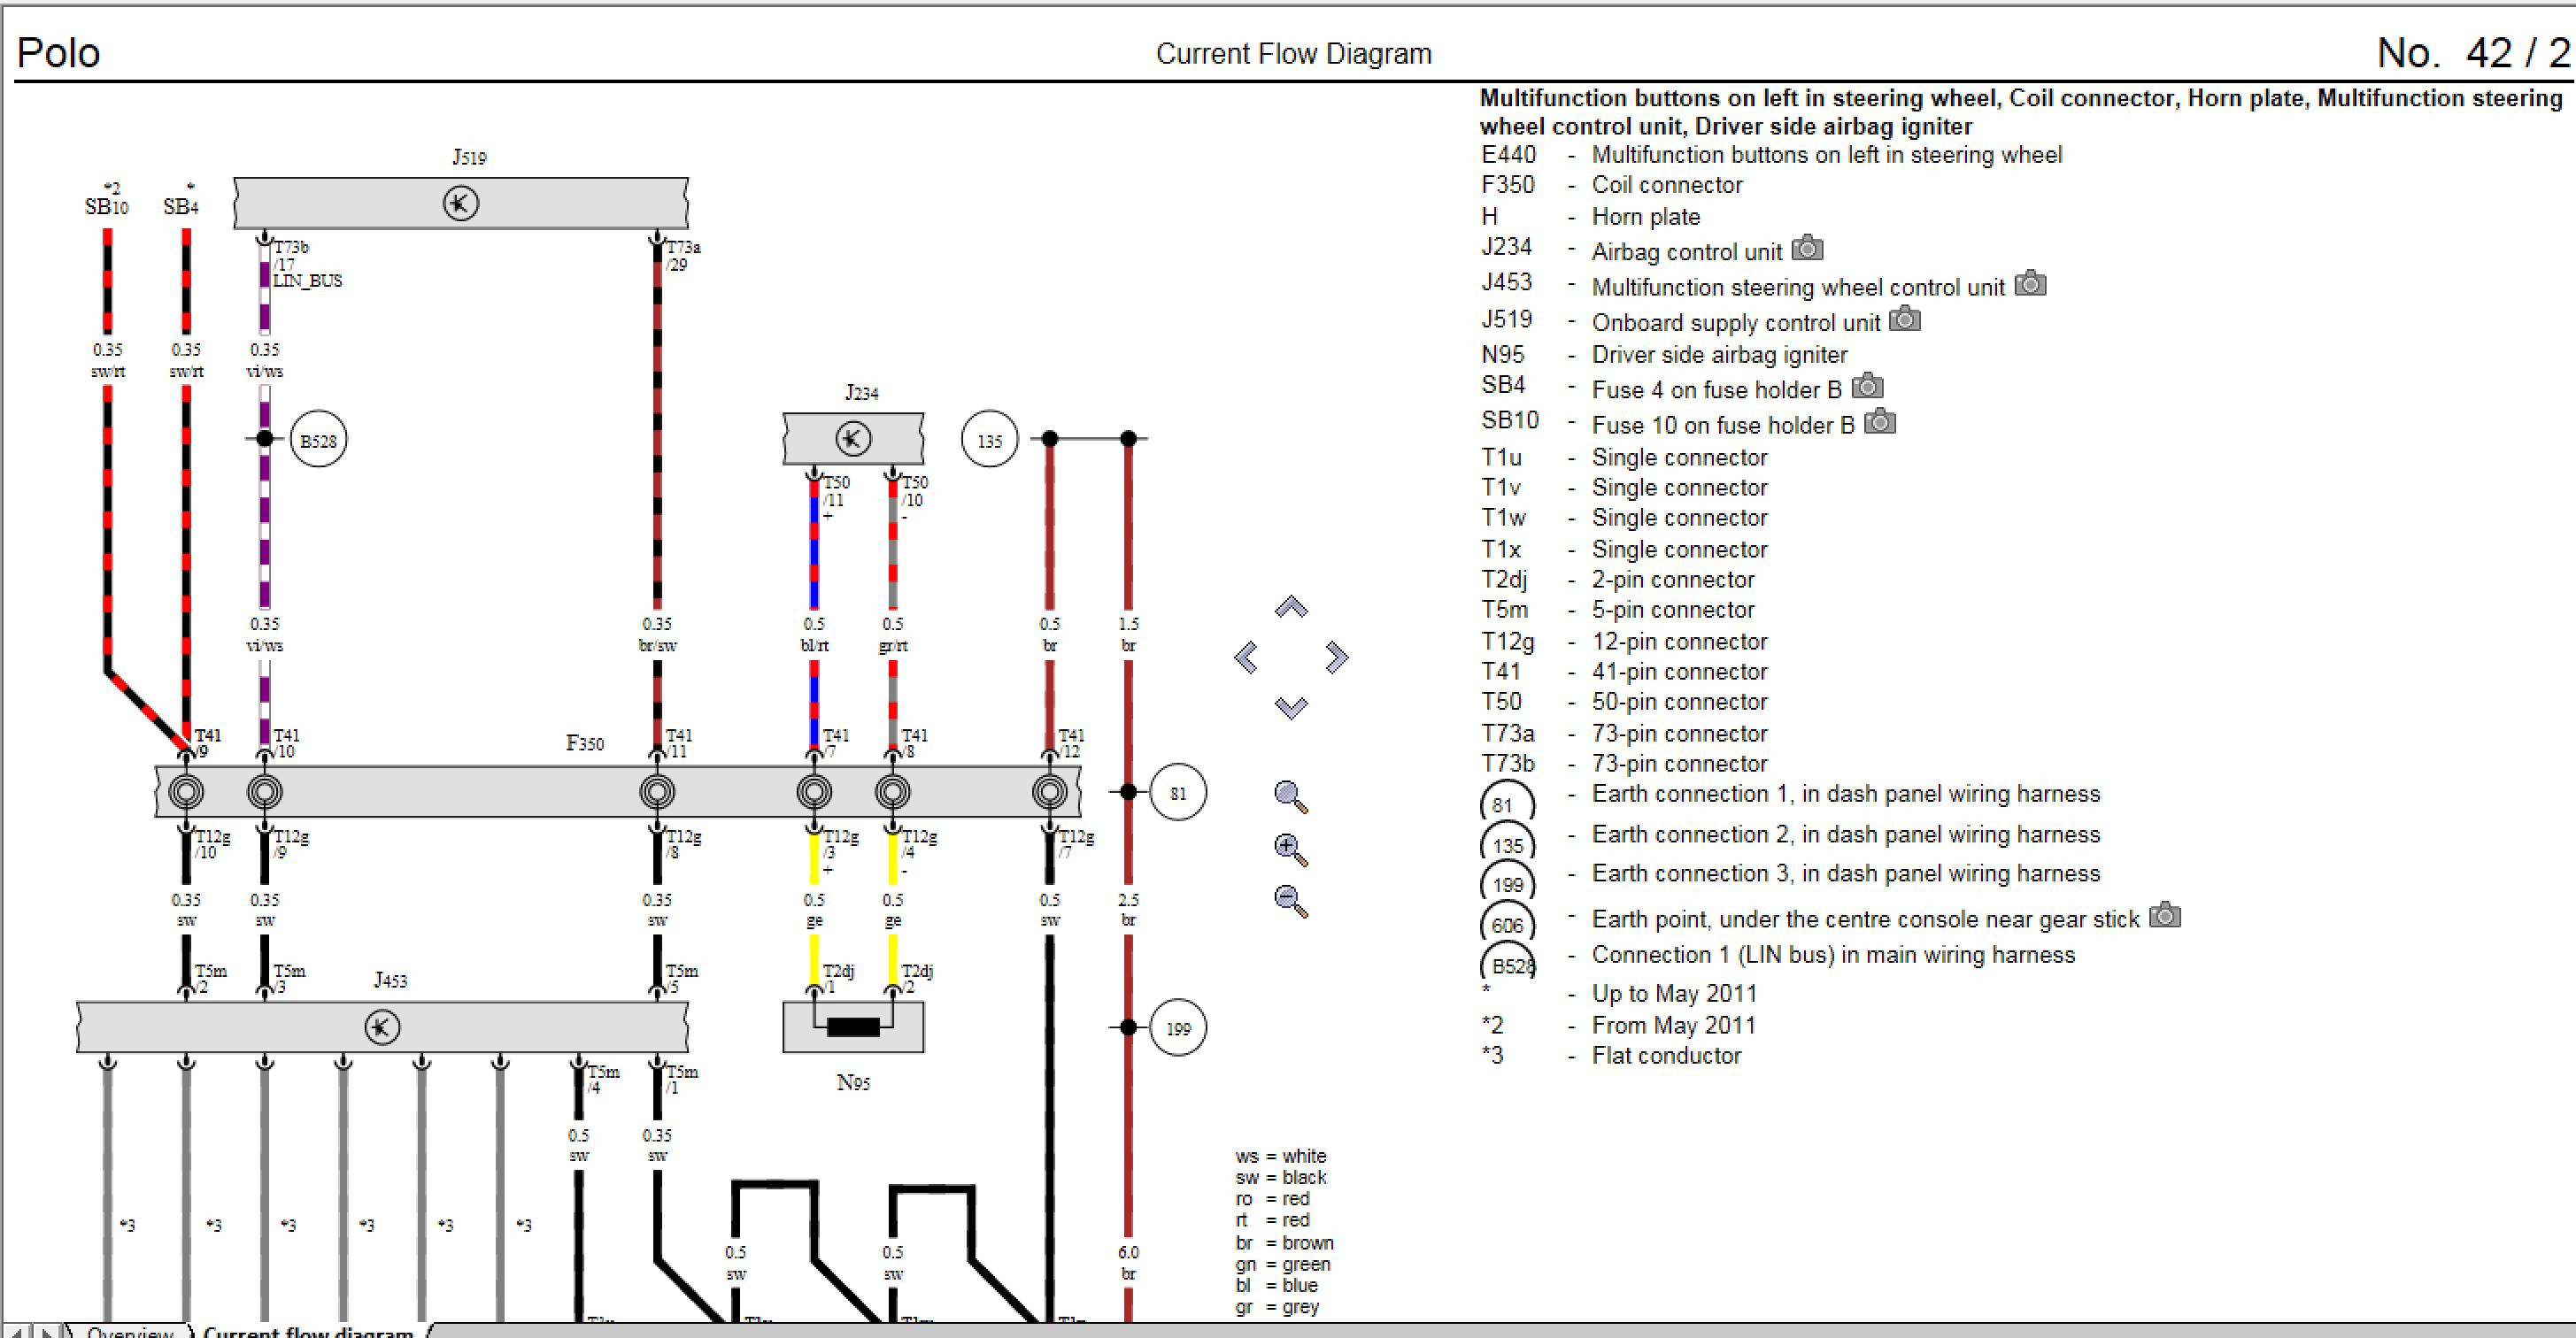 6R0 wiring.png